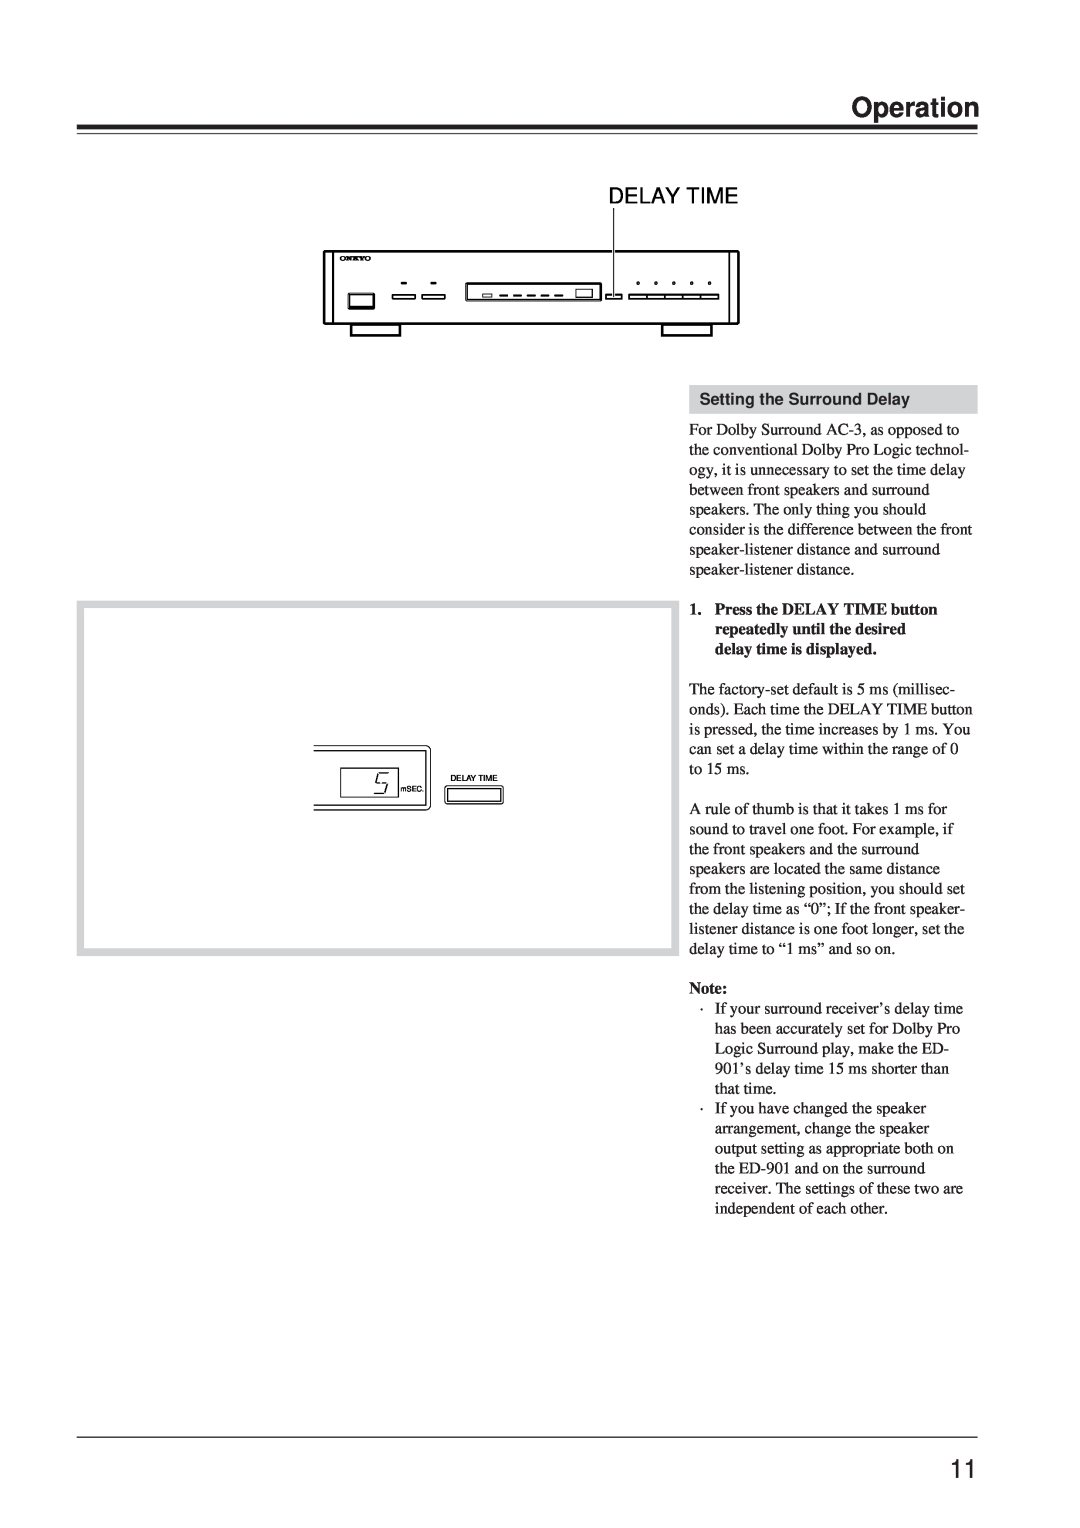 Onkyo ED-901 instruction manual Delay Time, Operation, Setting the Surround Delay 